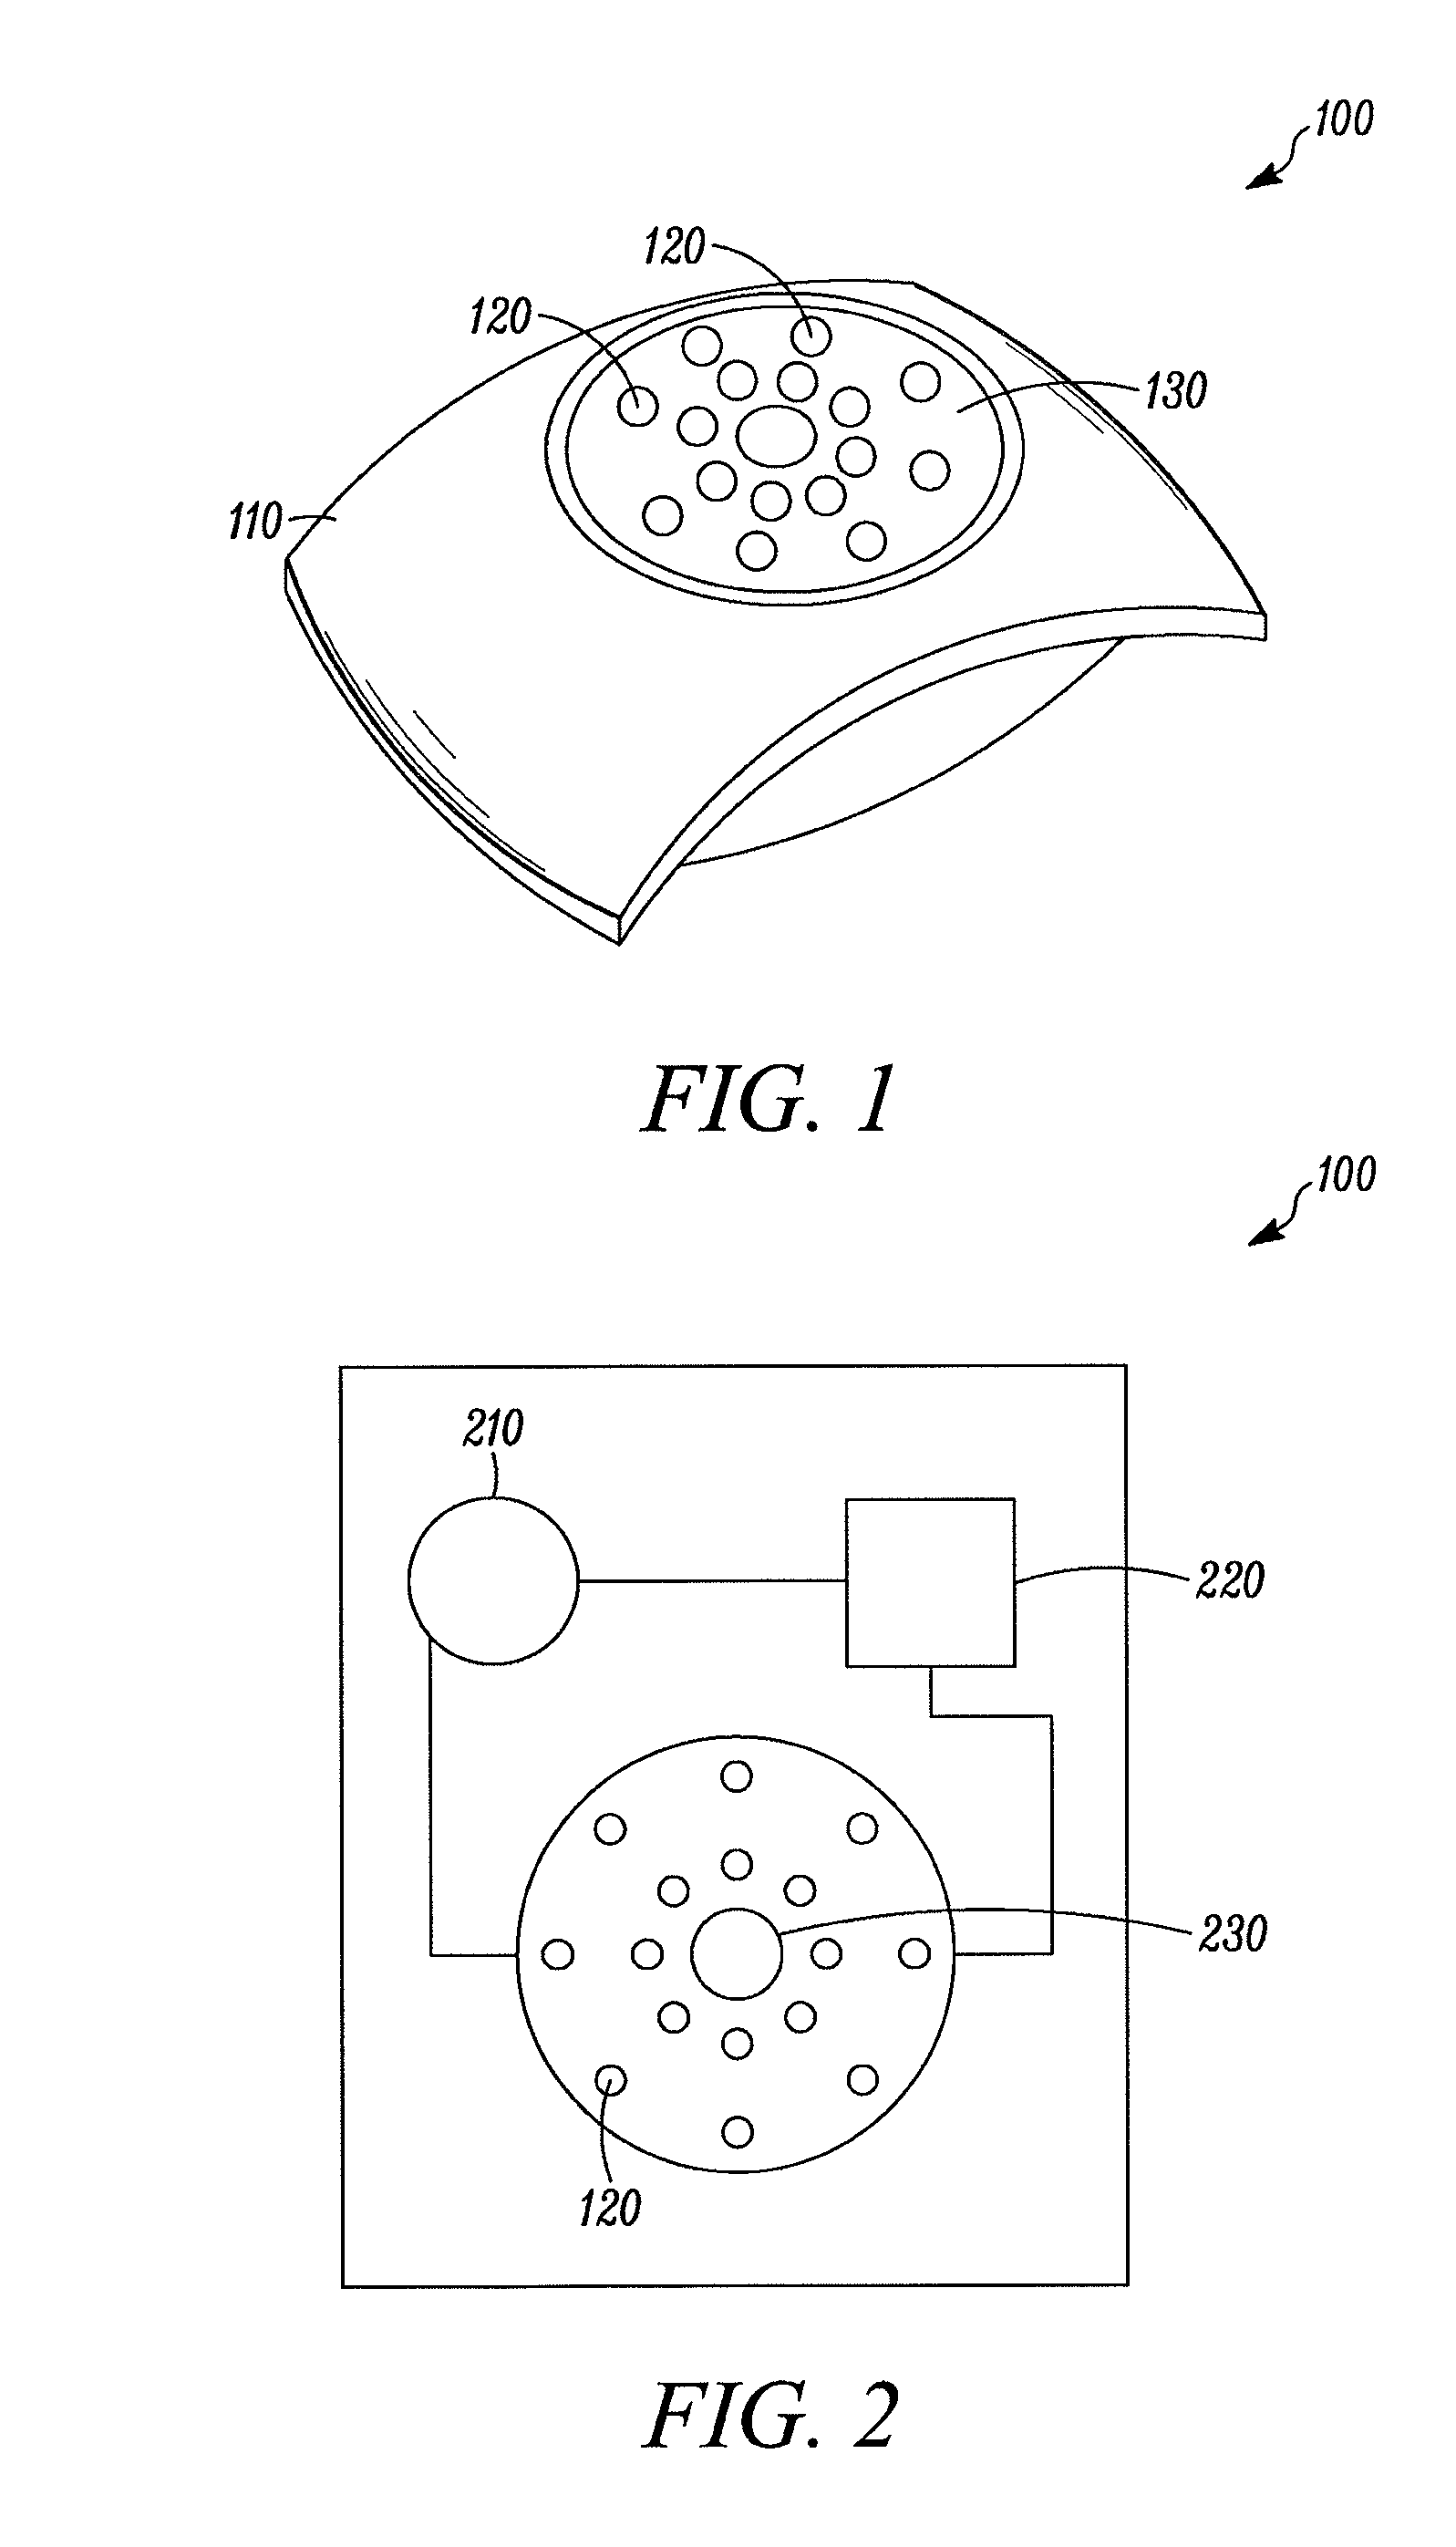 Grid Shifting System for a Lighting Circuit